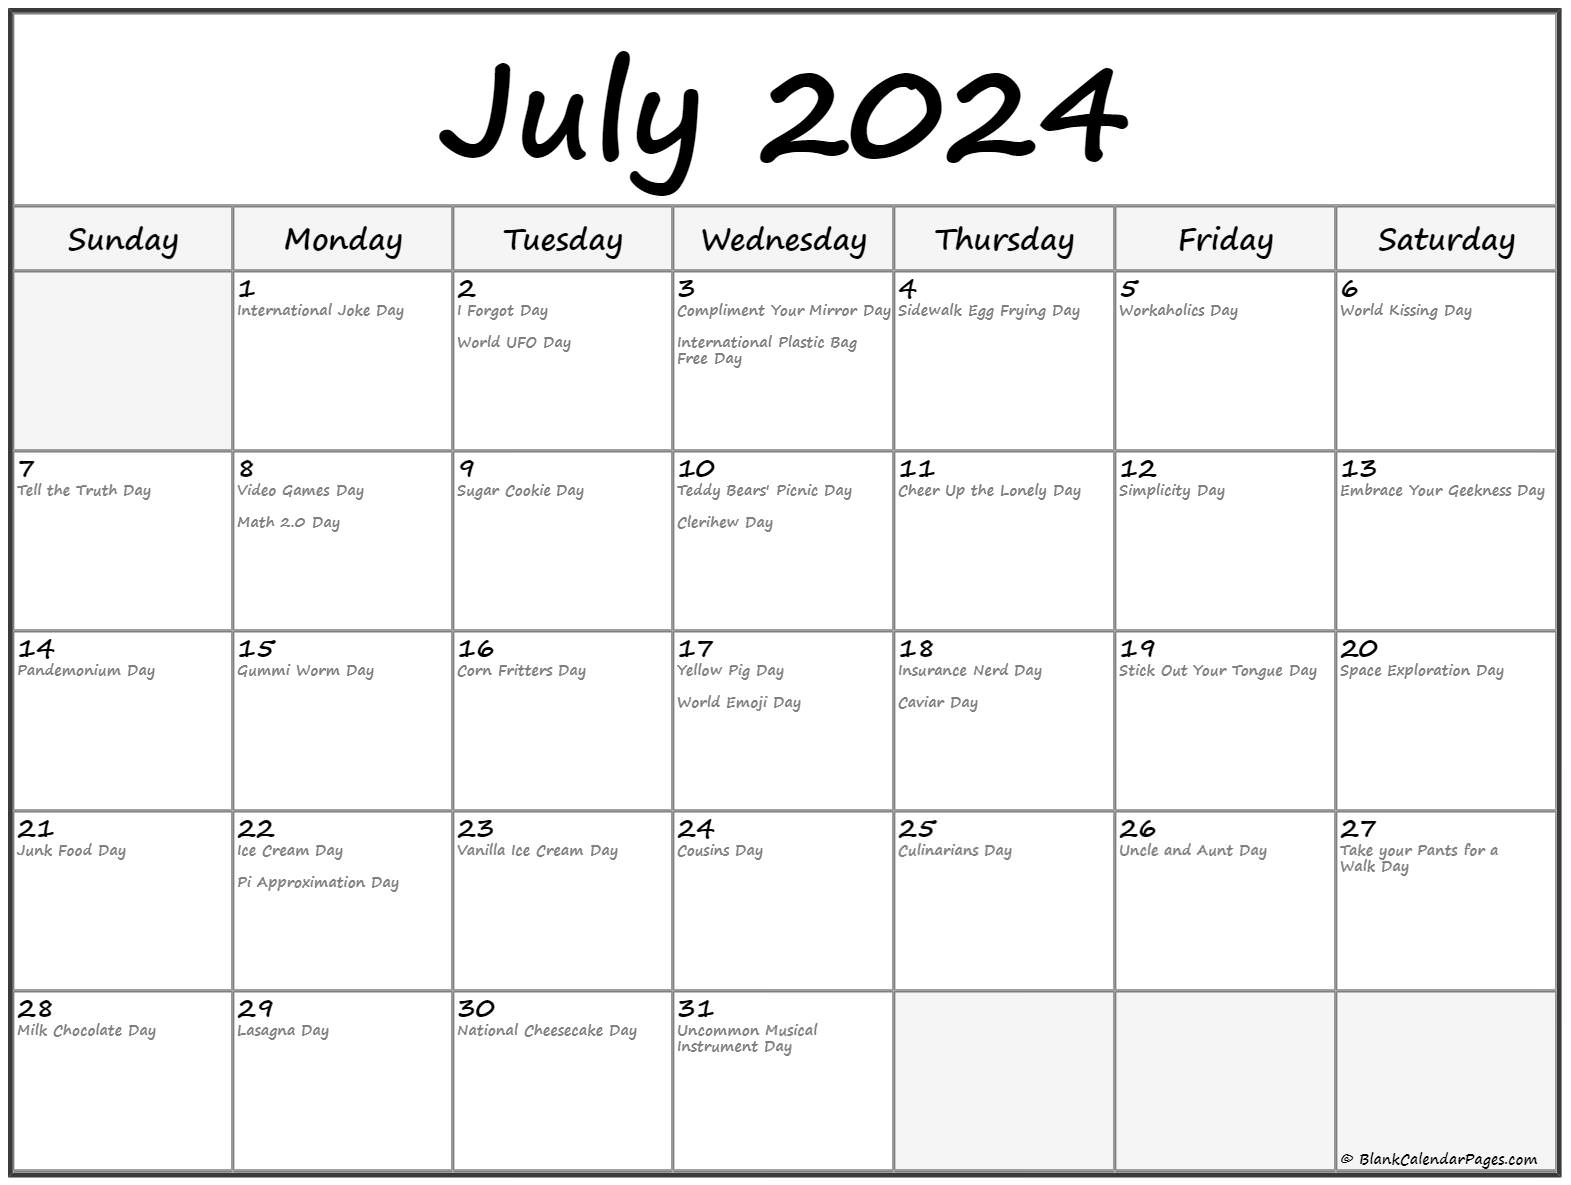 July 2024 With Holidays Calendar | National Day Calendar For July 2024